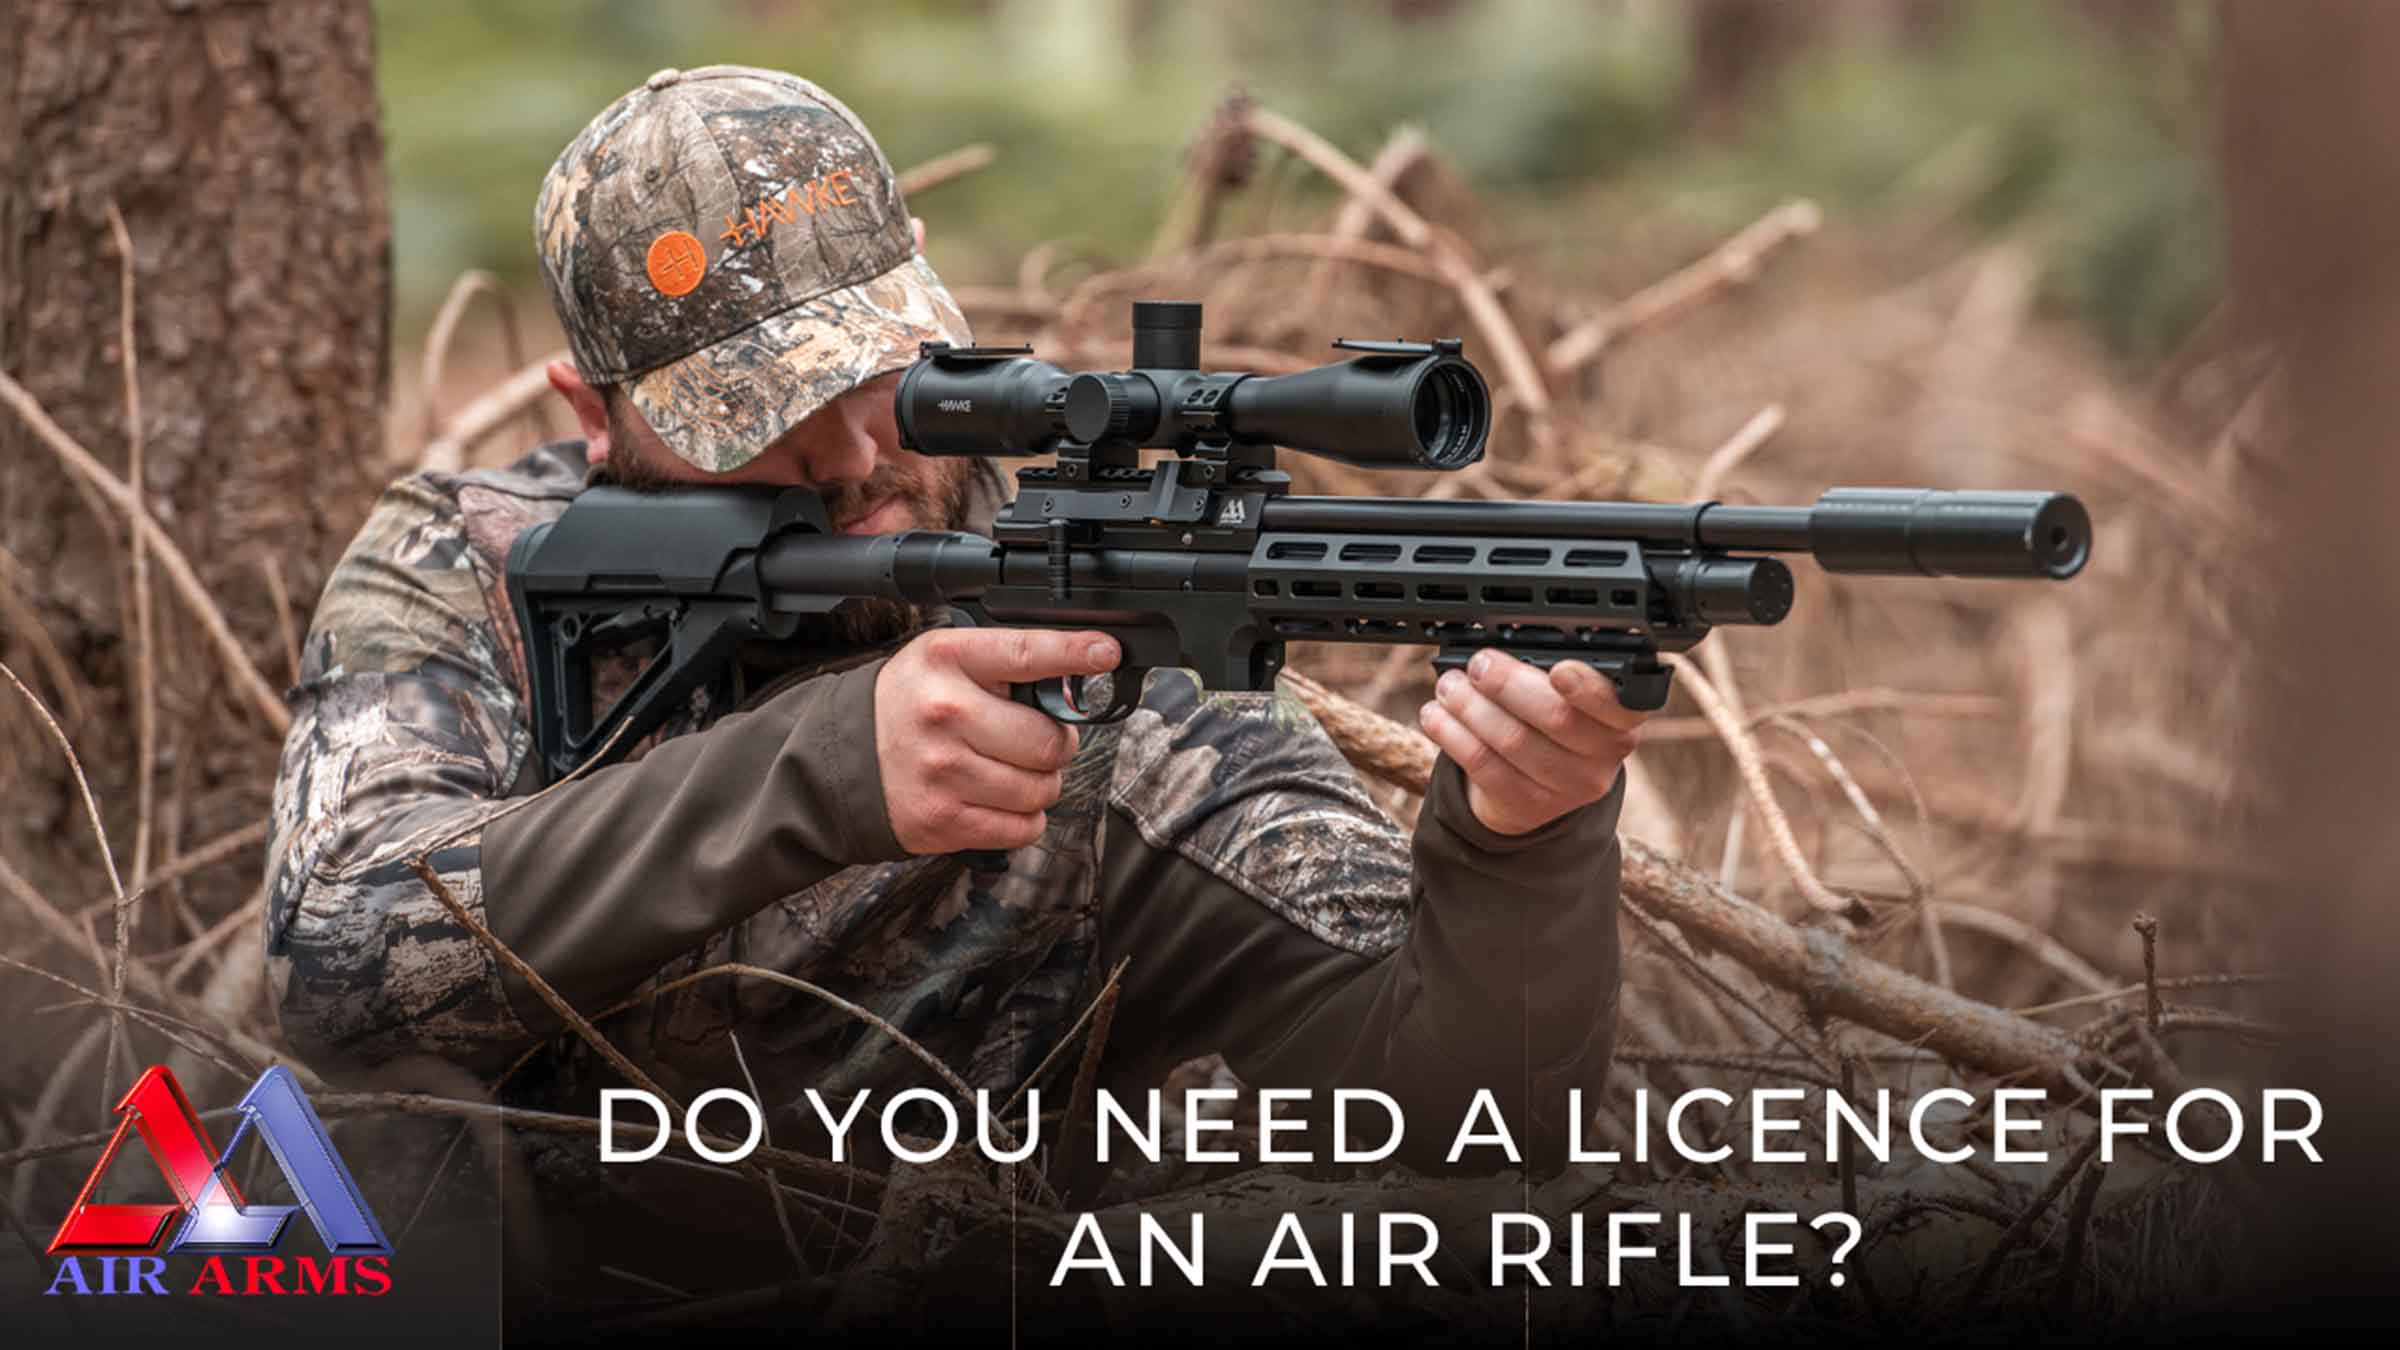 Do you need a licence for an air rifle?